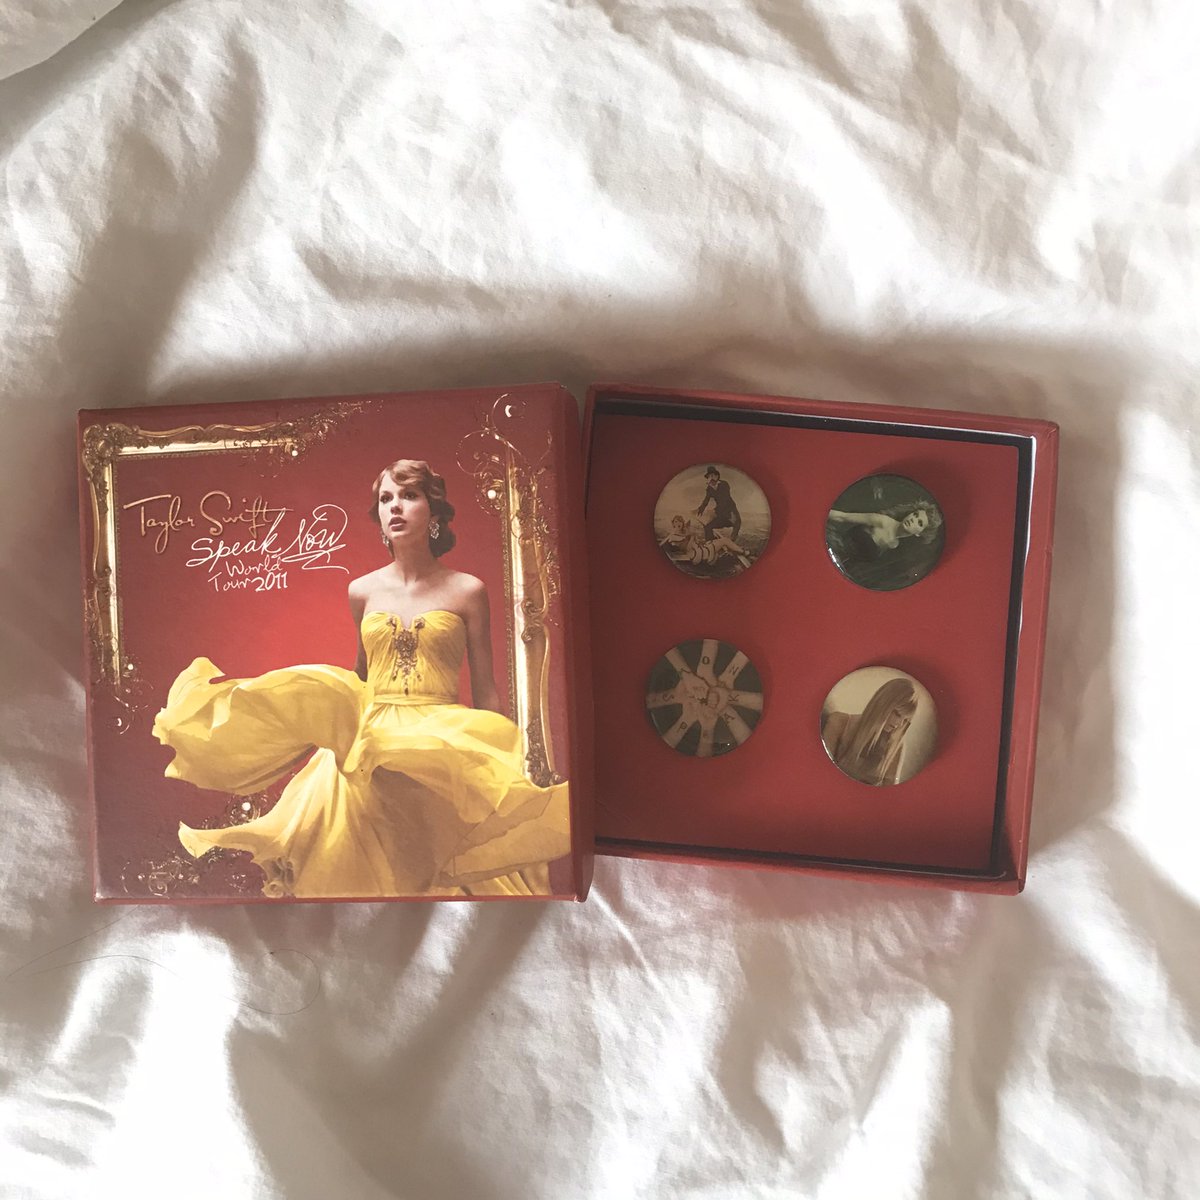 I absolutely forgot I had these speak now pins LOOK HOW CUTE THEY ARE